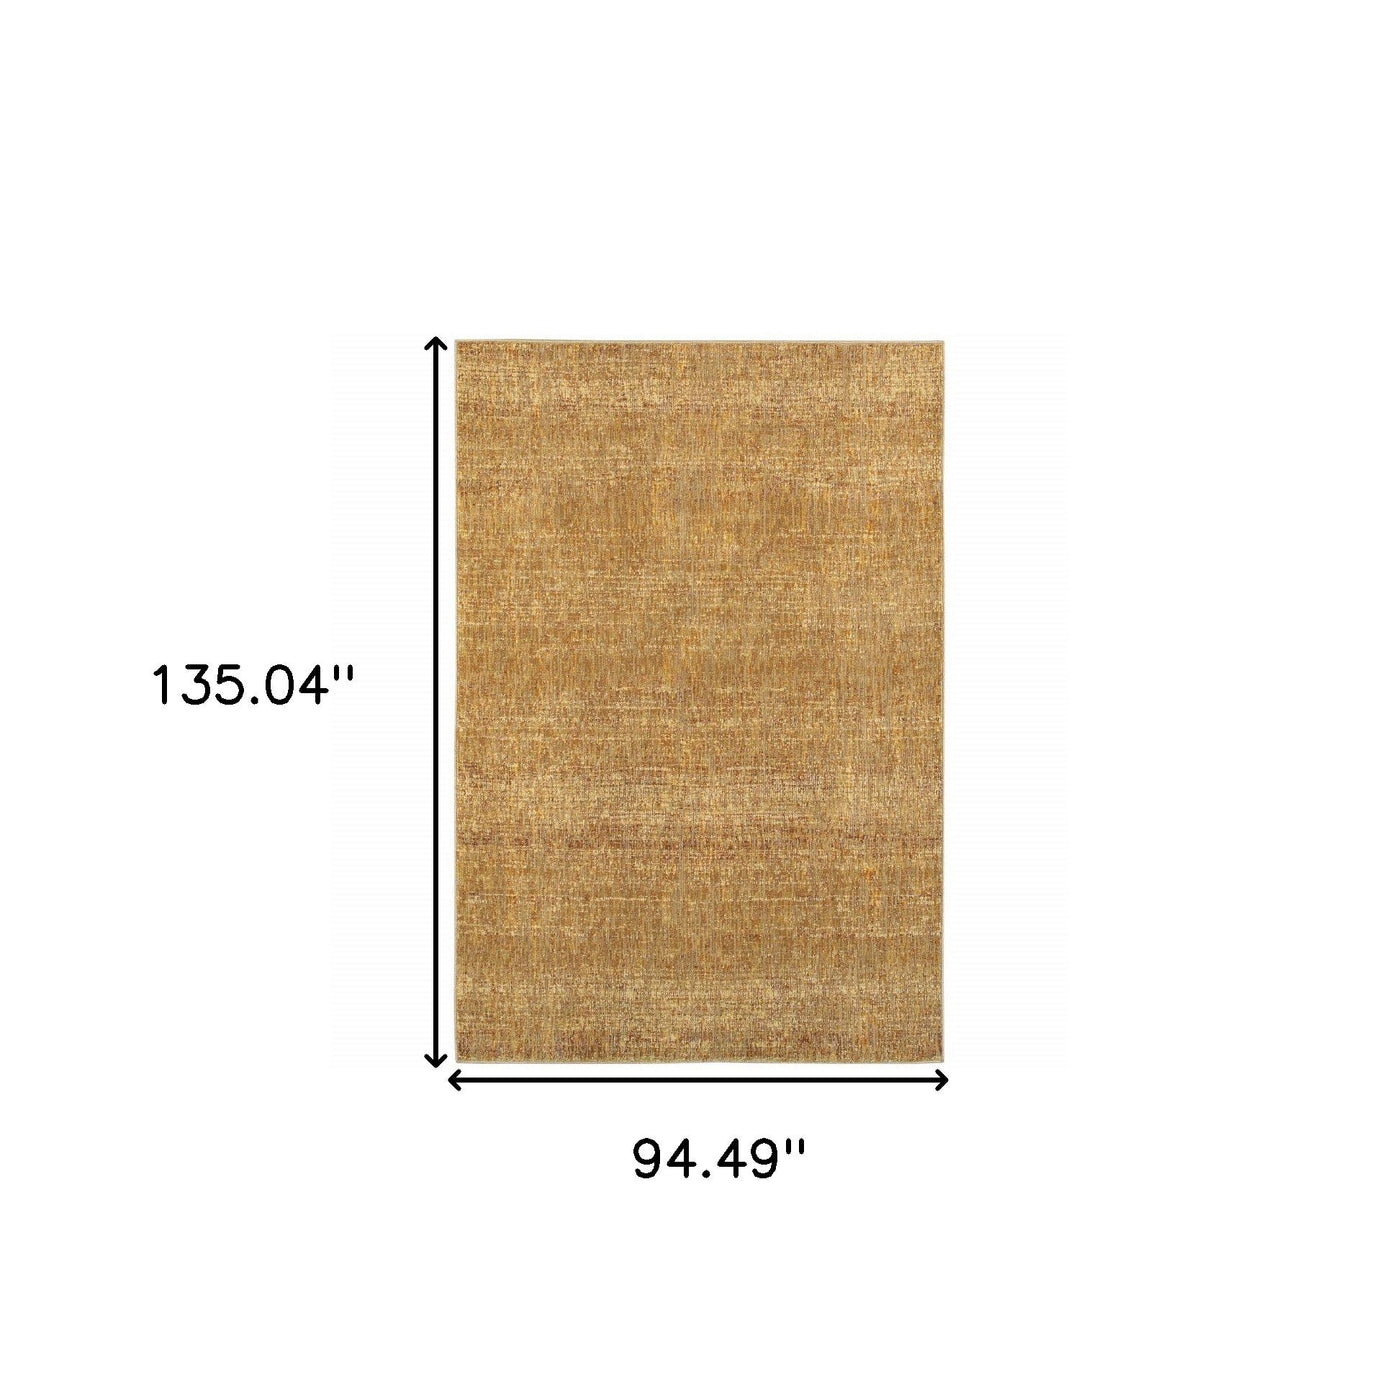 8’ X 10’ Gold Rust Brown Ivory Purple And Lavender Power Loom Stain Resistant Area Rug - Area Rugs